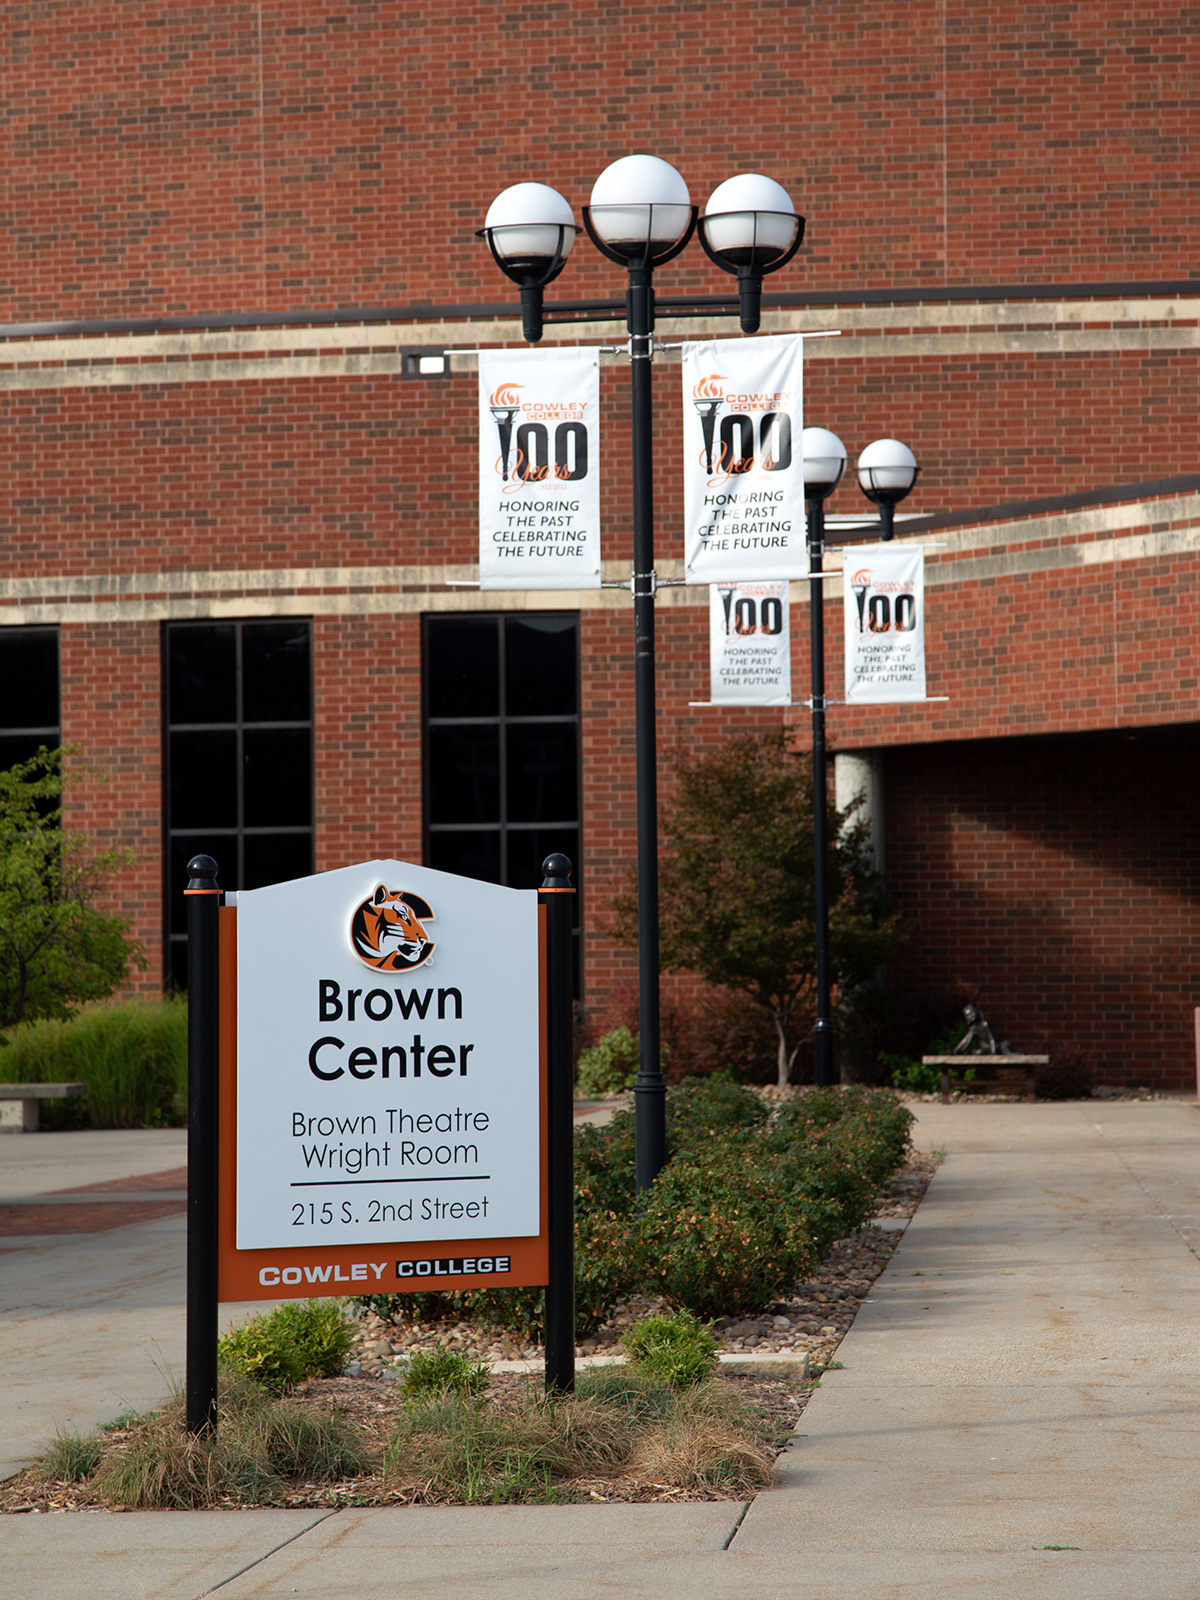 commemorative banners hanging in front of the Brown Center